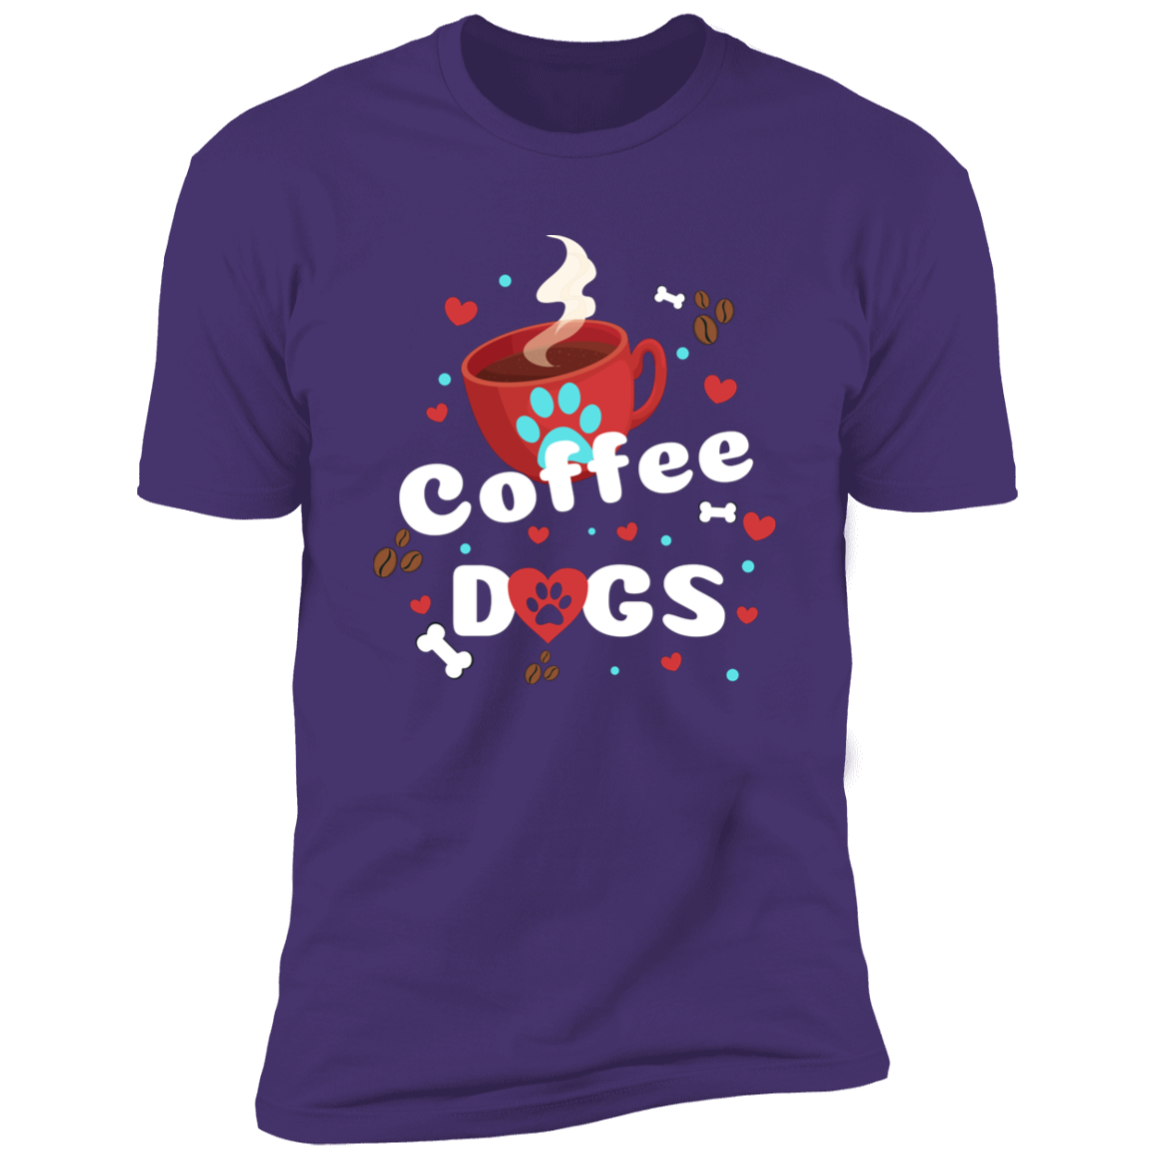 Coffee Dogs T-shirt, Dog Shirt for humans, in purple rush